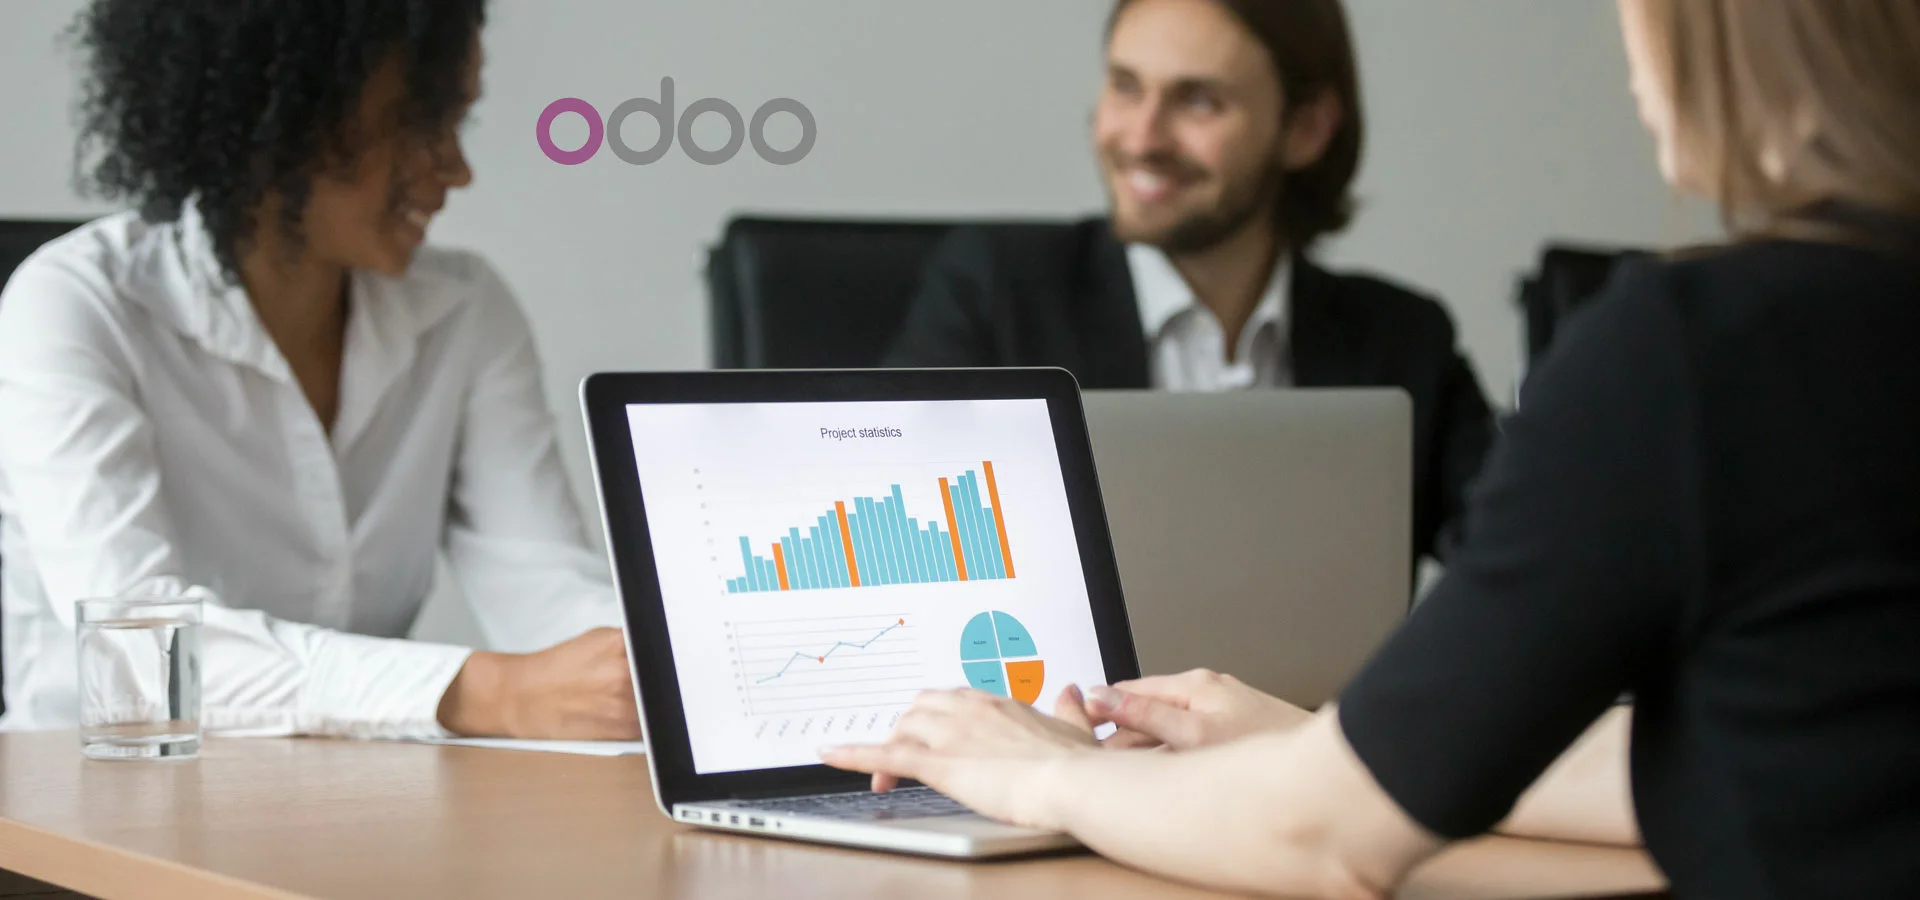 odoo-erp-support-and-services-related-blog-148